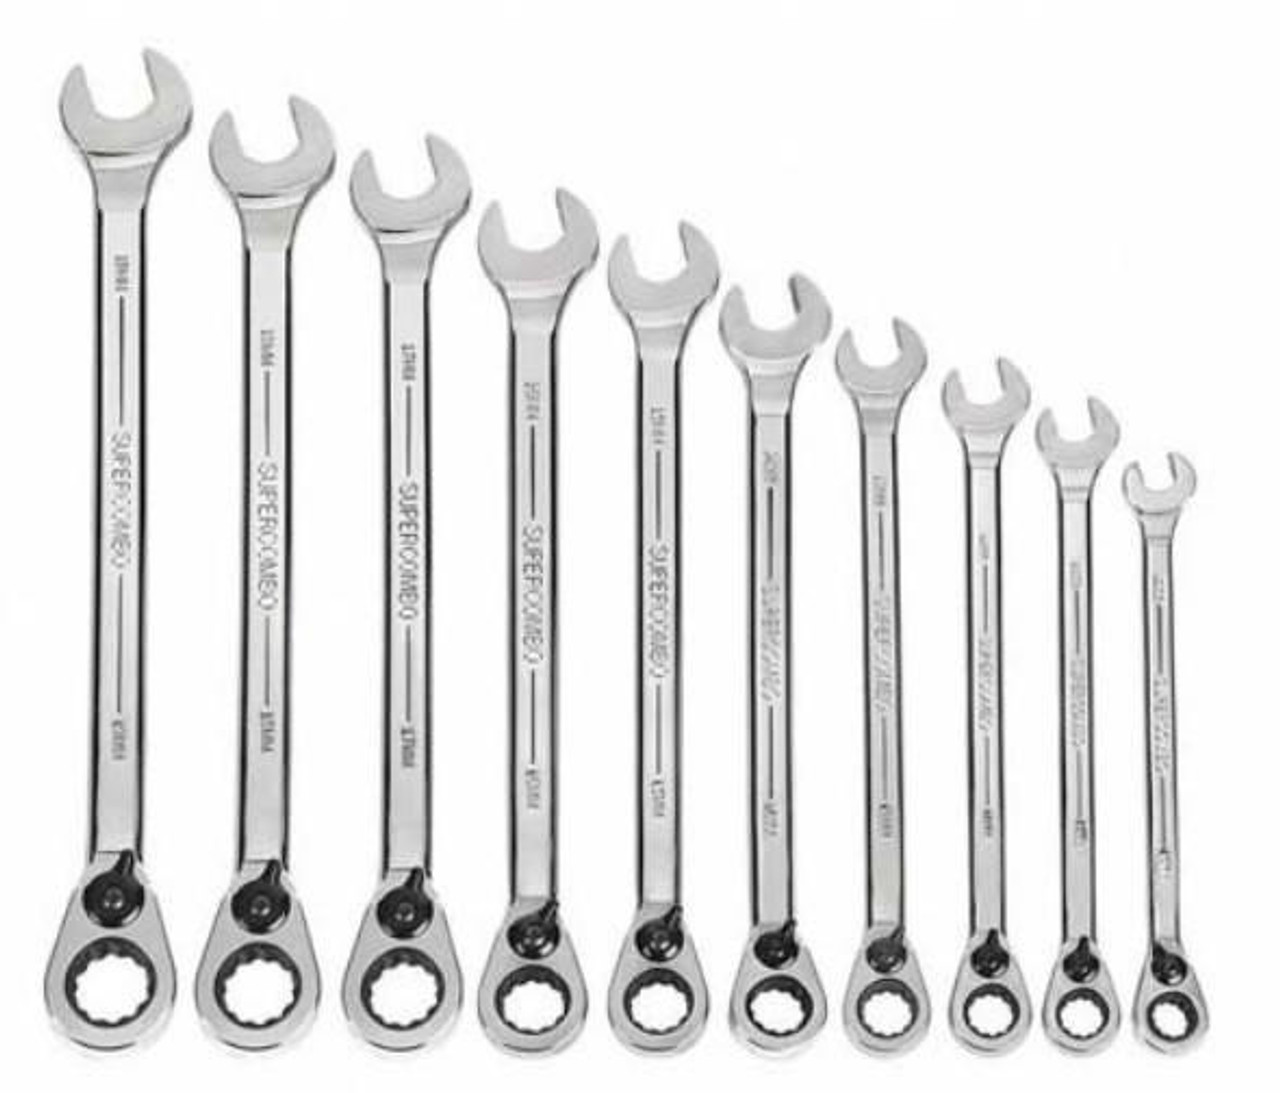 Williams 10 - 19mm Williams Stubby Combination Ratcheting Wrench Set 10 Pcs - MWS-10RSS 